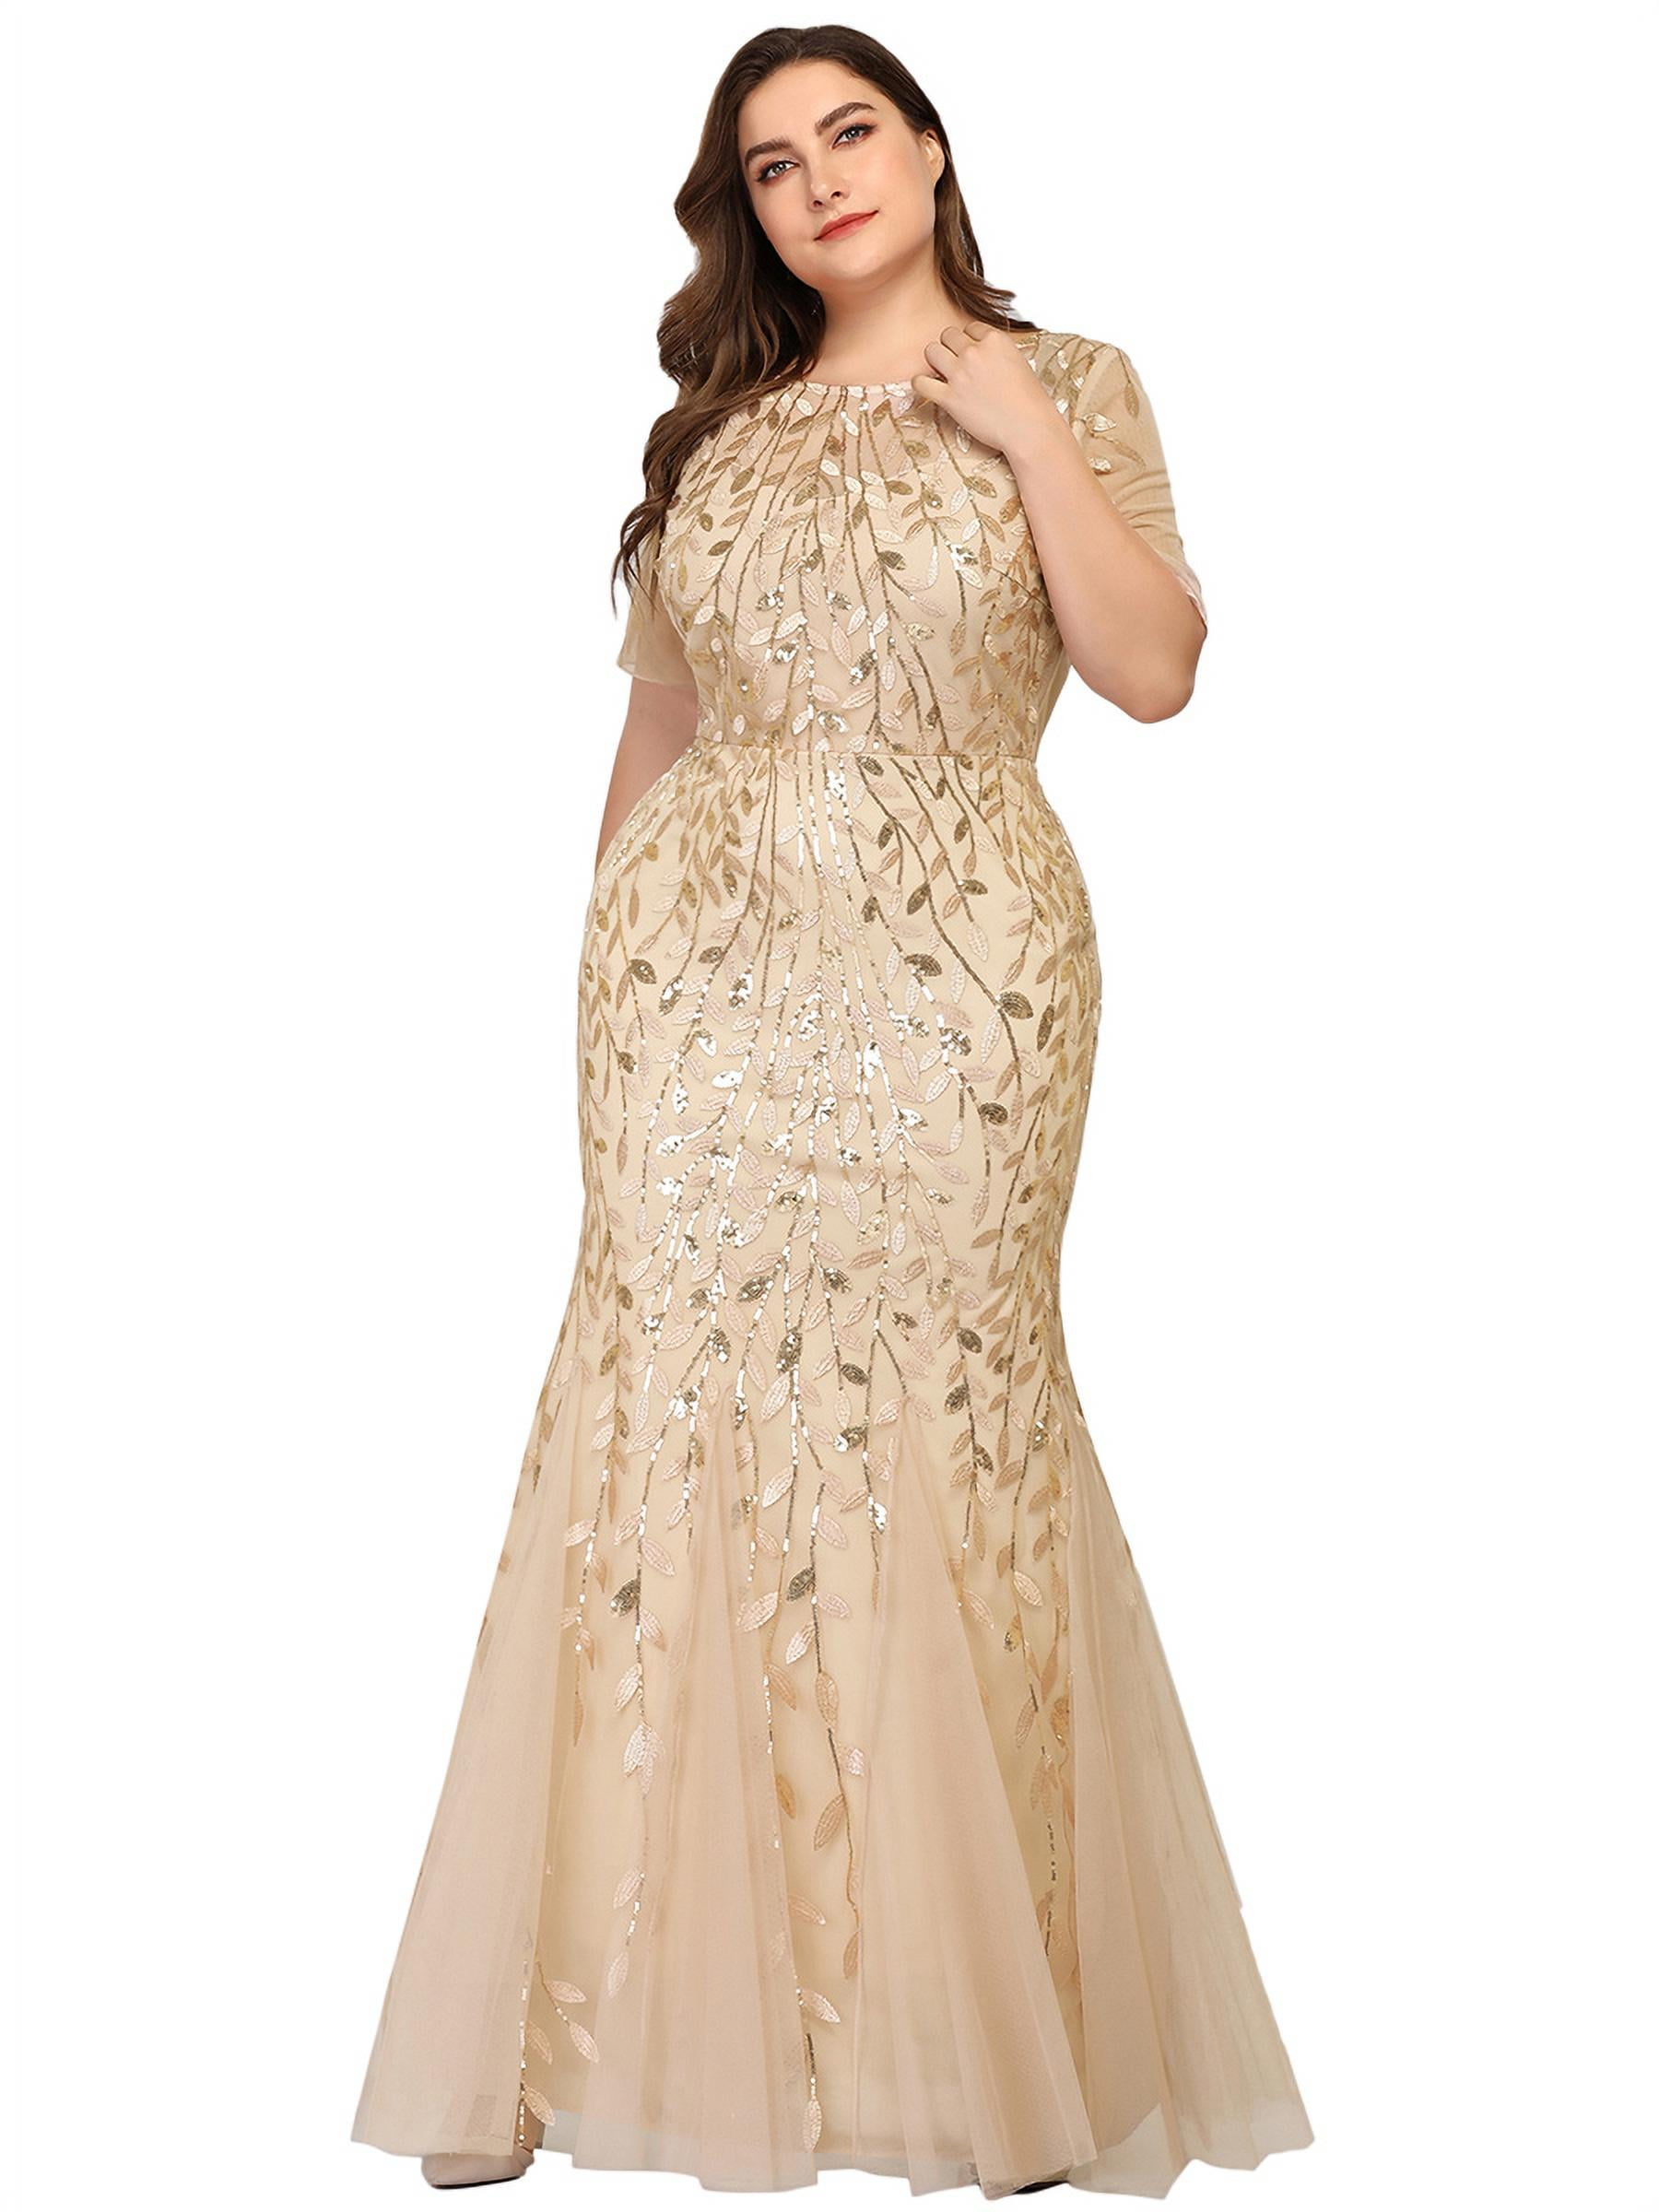 Sequin Golden Bridesmaid Formal Evening Cocktail Prom Party Gown Dress Mermaid